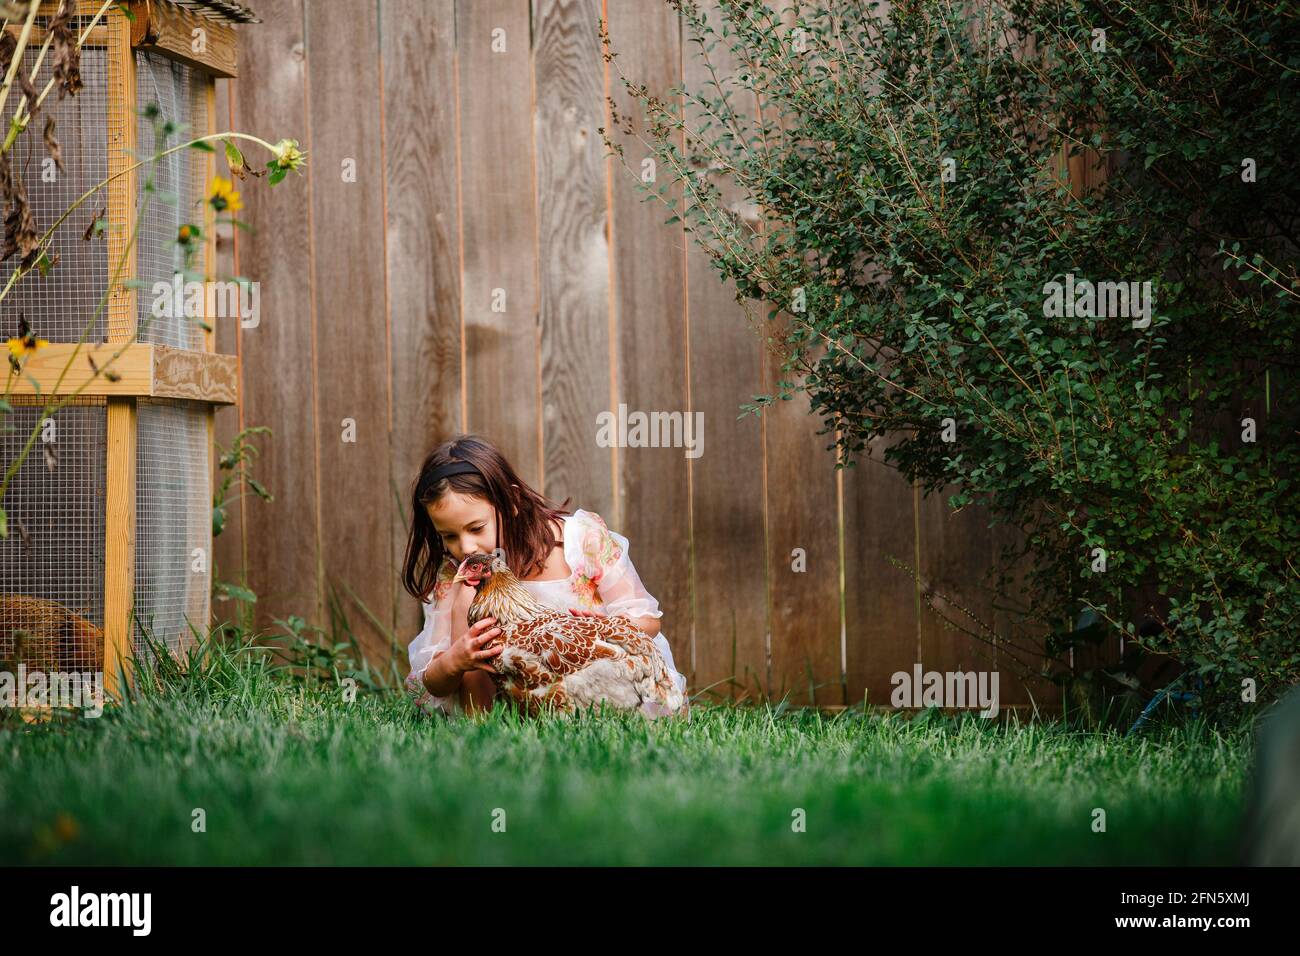 A cute little girl plays with a chicken in a flower-filled backyard Stock Photo